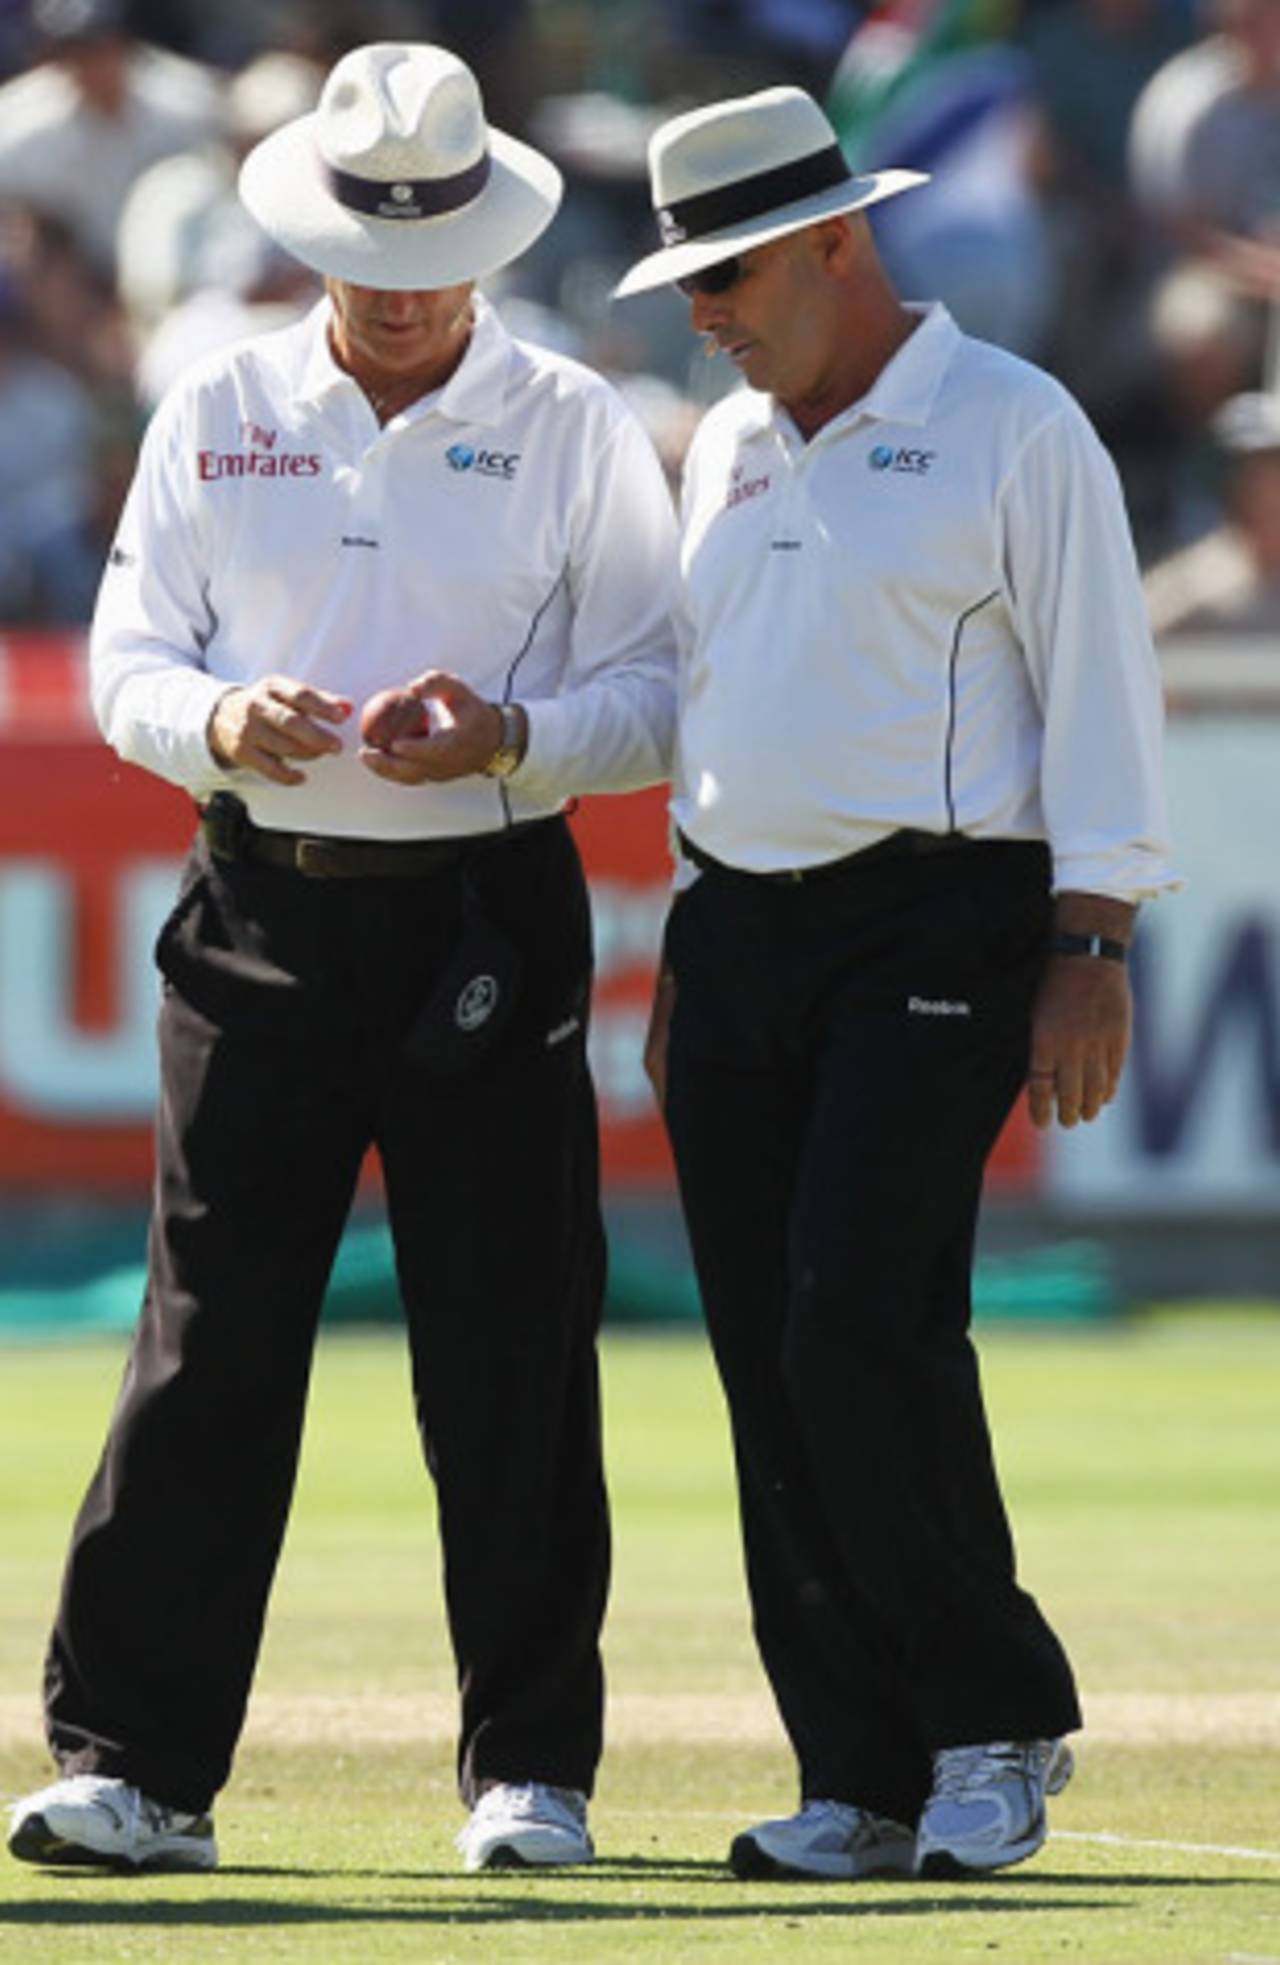 The umpires, Tony Hill and Daryl Harper, examine the ball after it was stepped on by Stuart Broad&nbsp;&nbsp;&bull;&nbsp;&nbsp;Getty Images